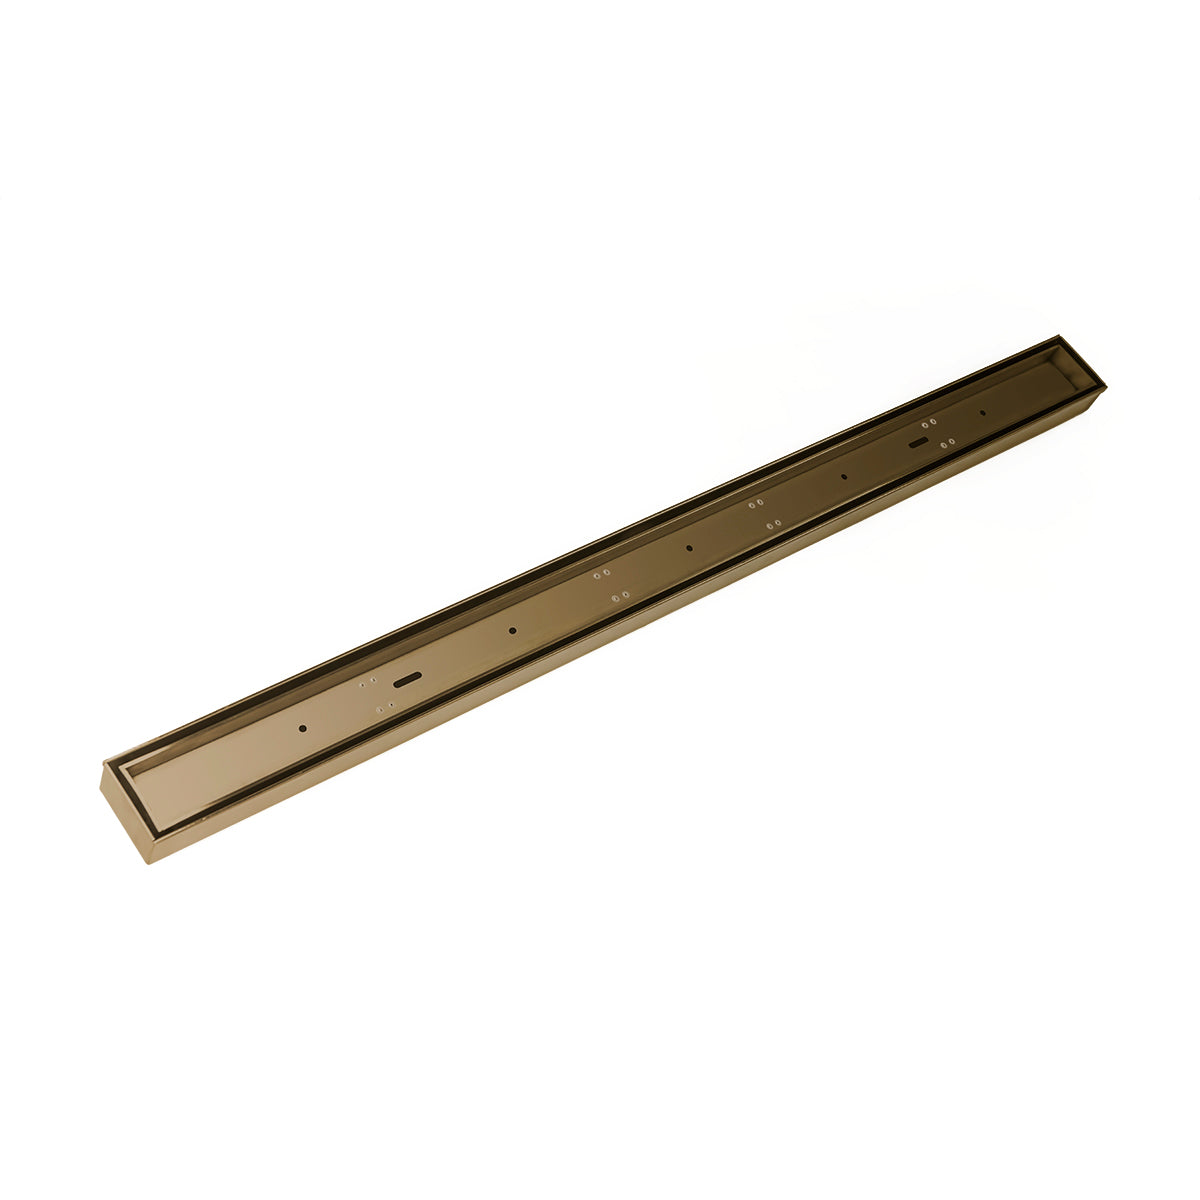 Infinity Drain 36" FX Low Profile Series Fixed Length Linear Drain Kit with Tile Insert Frame